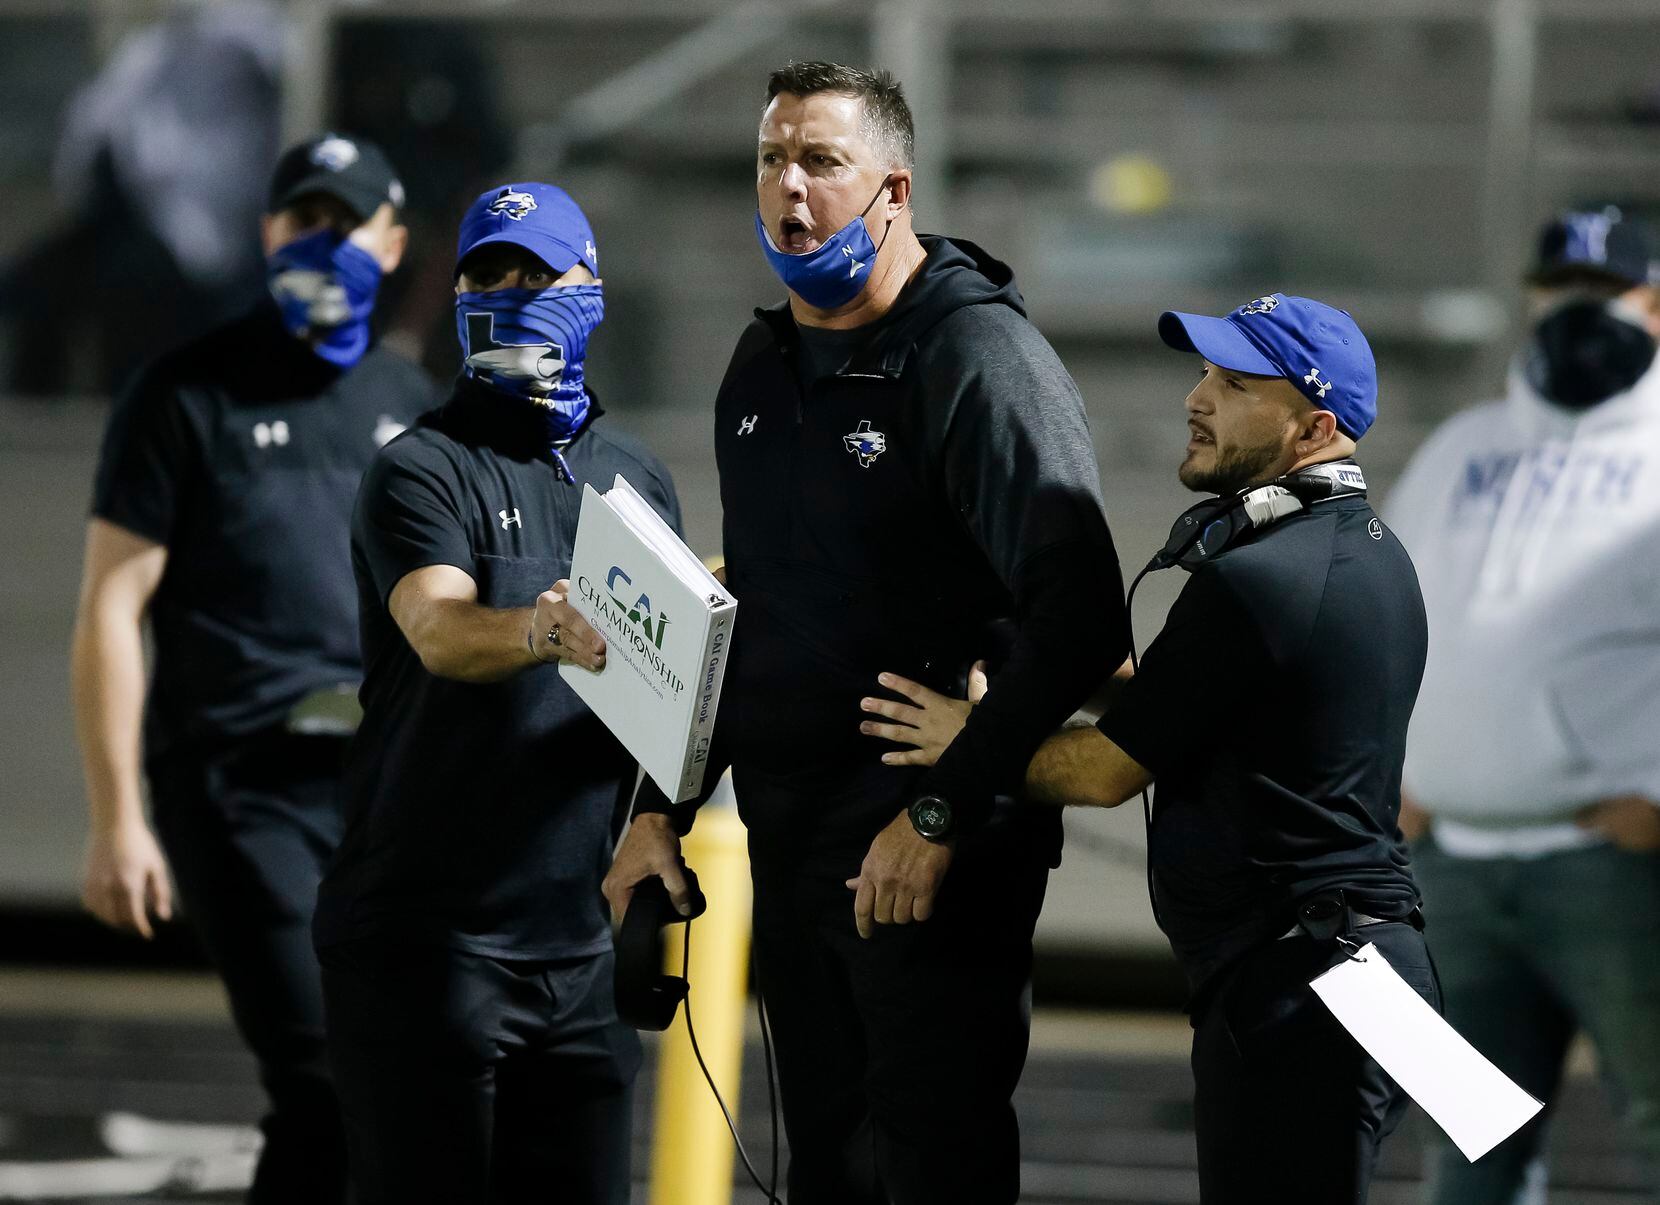 North Forney head coach Randy Jackson, center, is held back by assistant coaches while arguing a call with an official during the second half of a high school playoff football game against Ennis in Forney, Thursday, November 19, 2020. Ennis won 38-14. (Brandon Wade/Special Contributor)